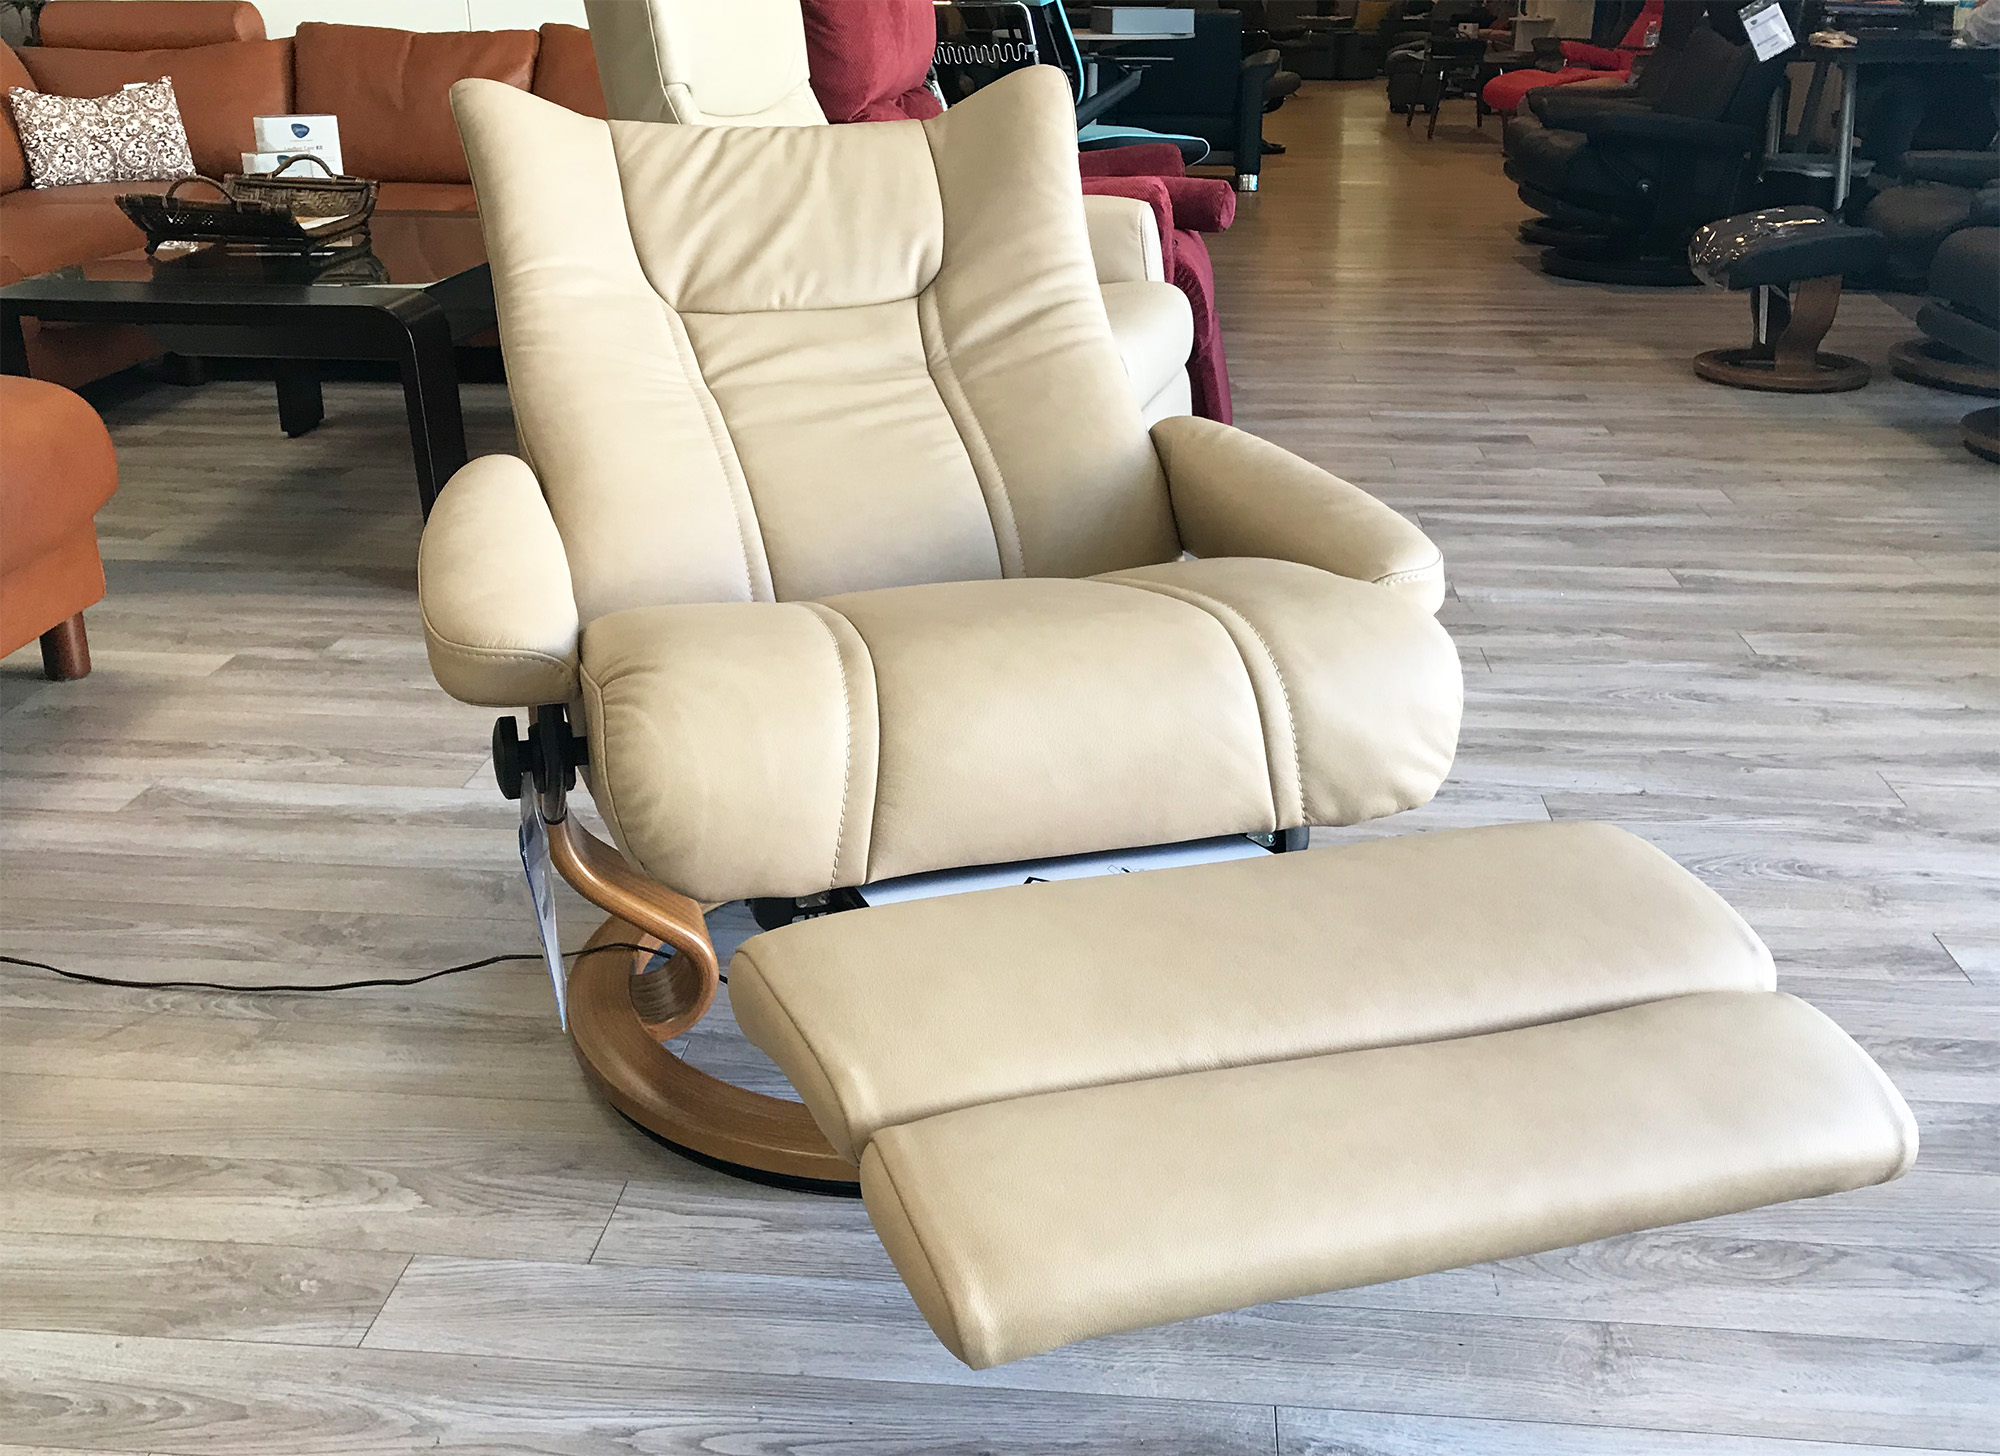 Stressless Wing LegComfort Paloma Sand Leather Color Recliner Chair with Footrest 